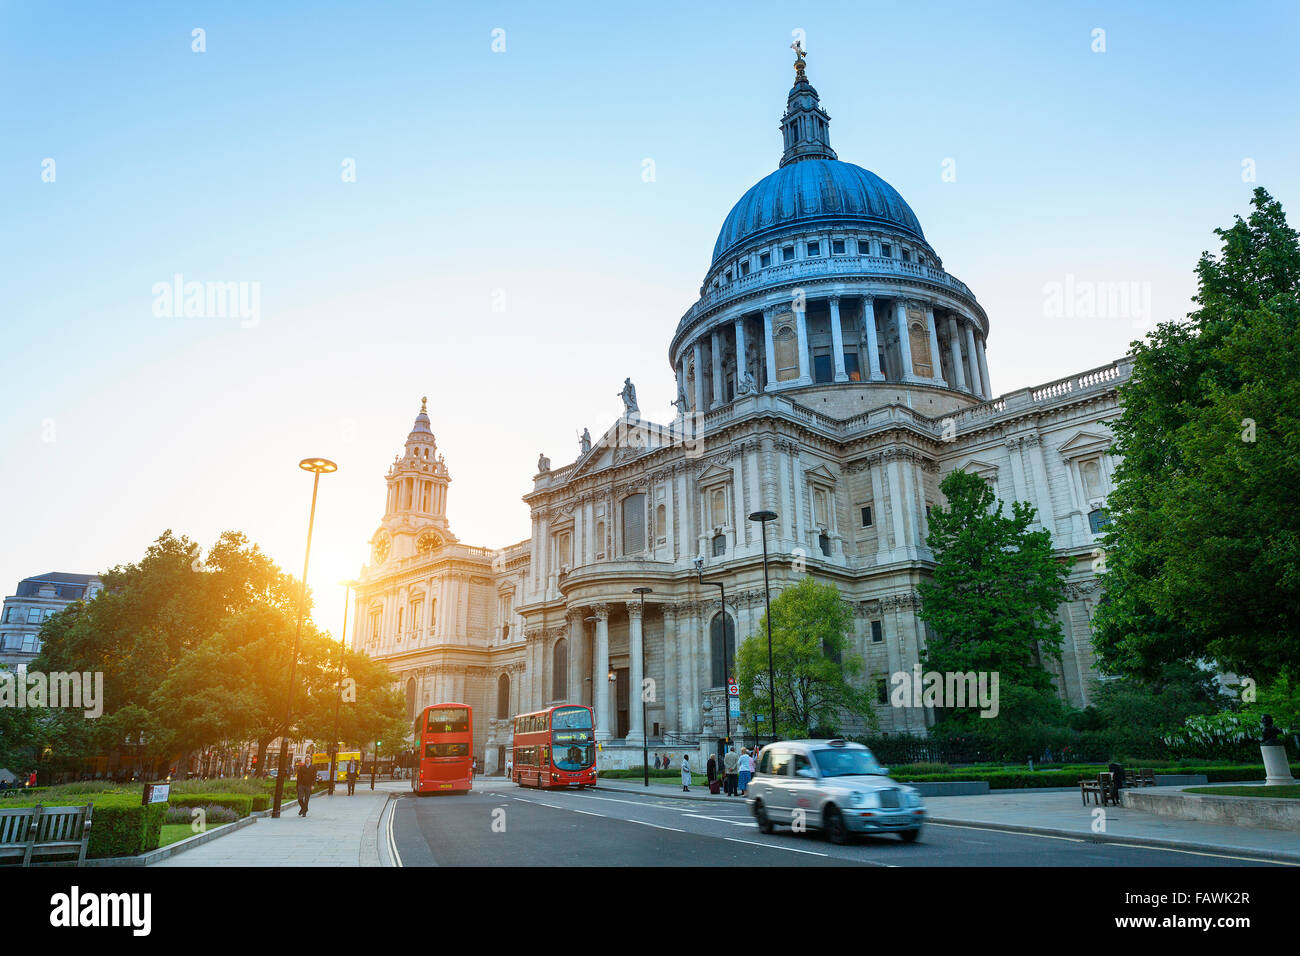 London, St. Paul's Cathedral at sunset Stock Photo